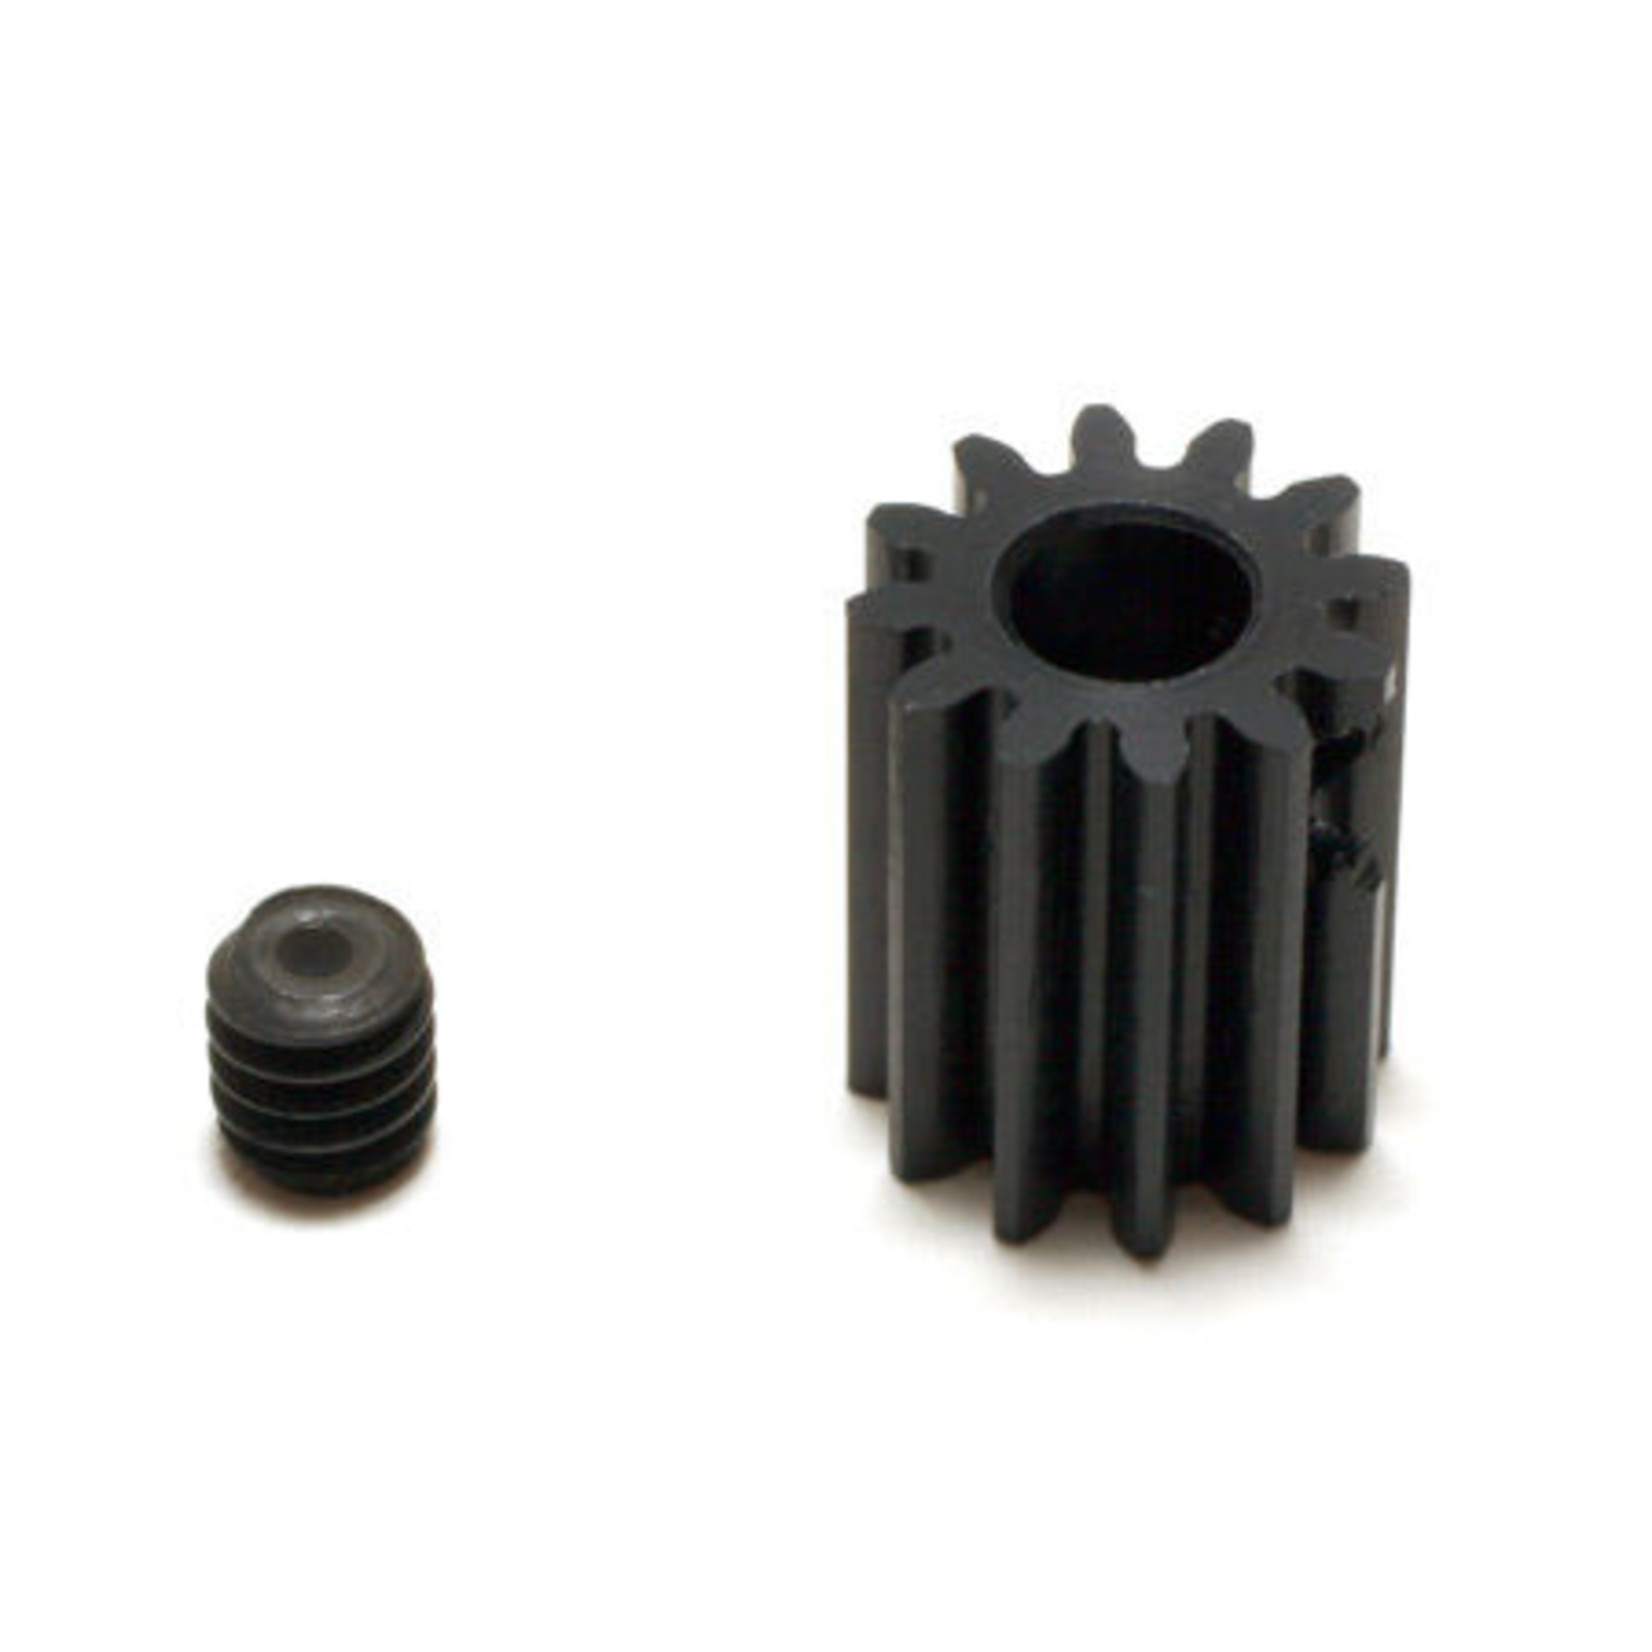 Robinson Racing Products (RRP) 48P Hard Coated Aluminum Pinion Gear, 12T